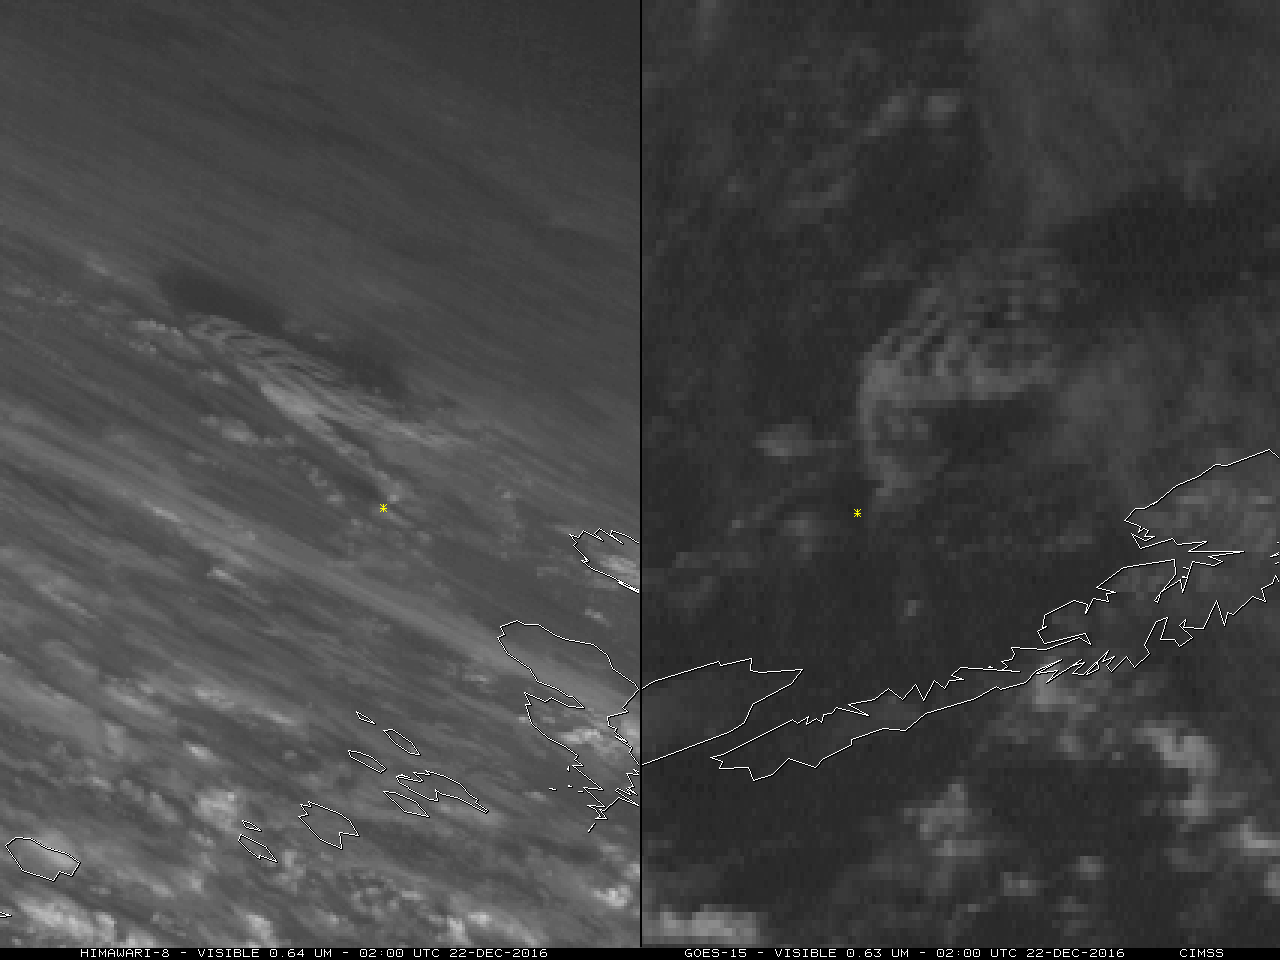 Himawari-8 0.64 µm (left) and GOES-15 0.63 µm (right) Visible images [click to play animation]